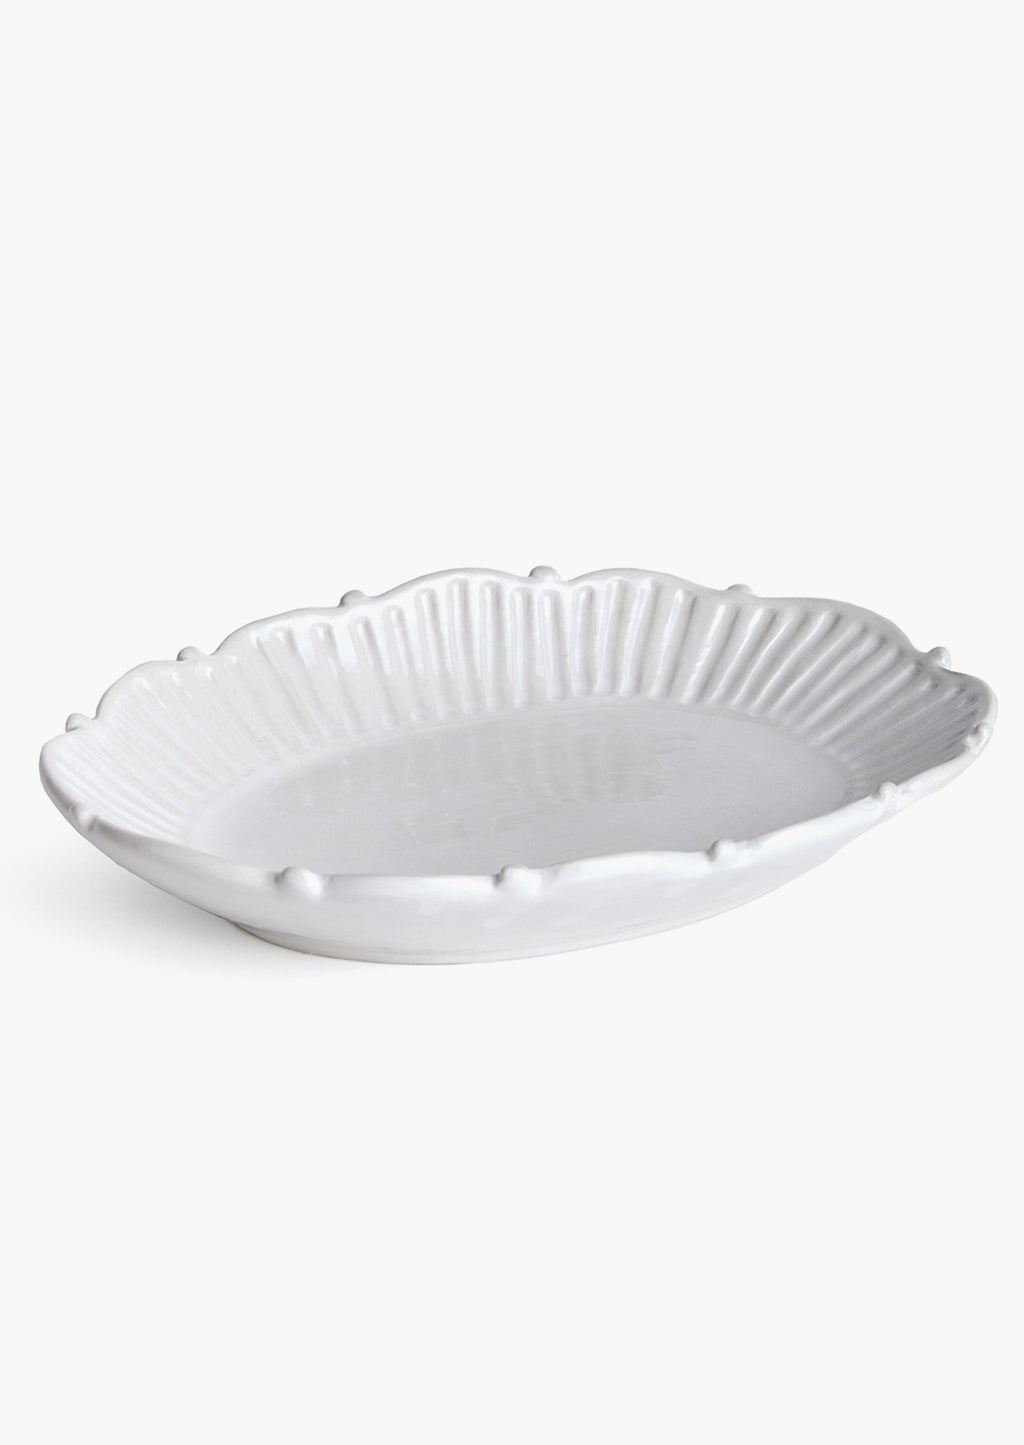 3: An oval shaped tray with ruffled and pleated border with ball detail around edges.